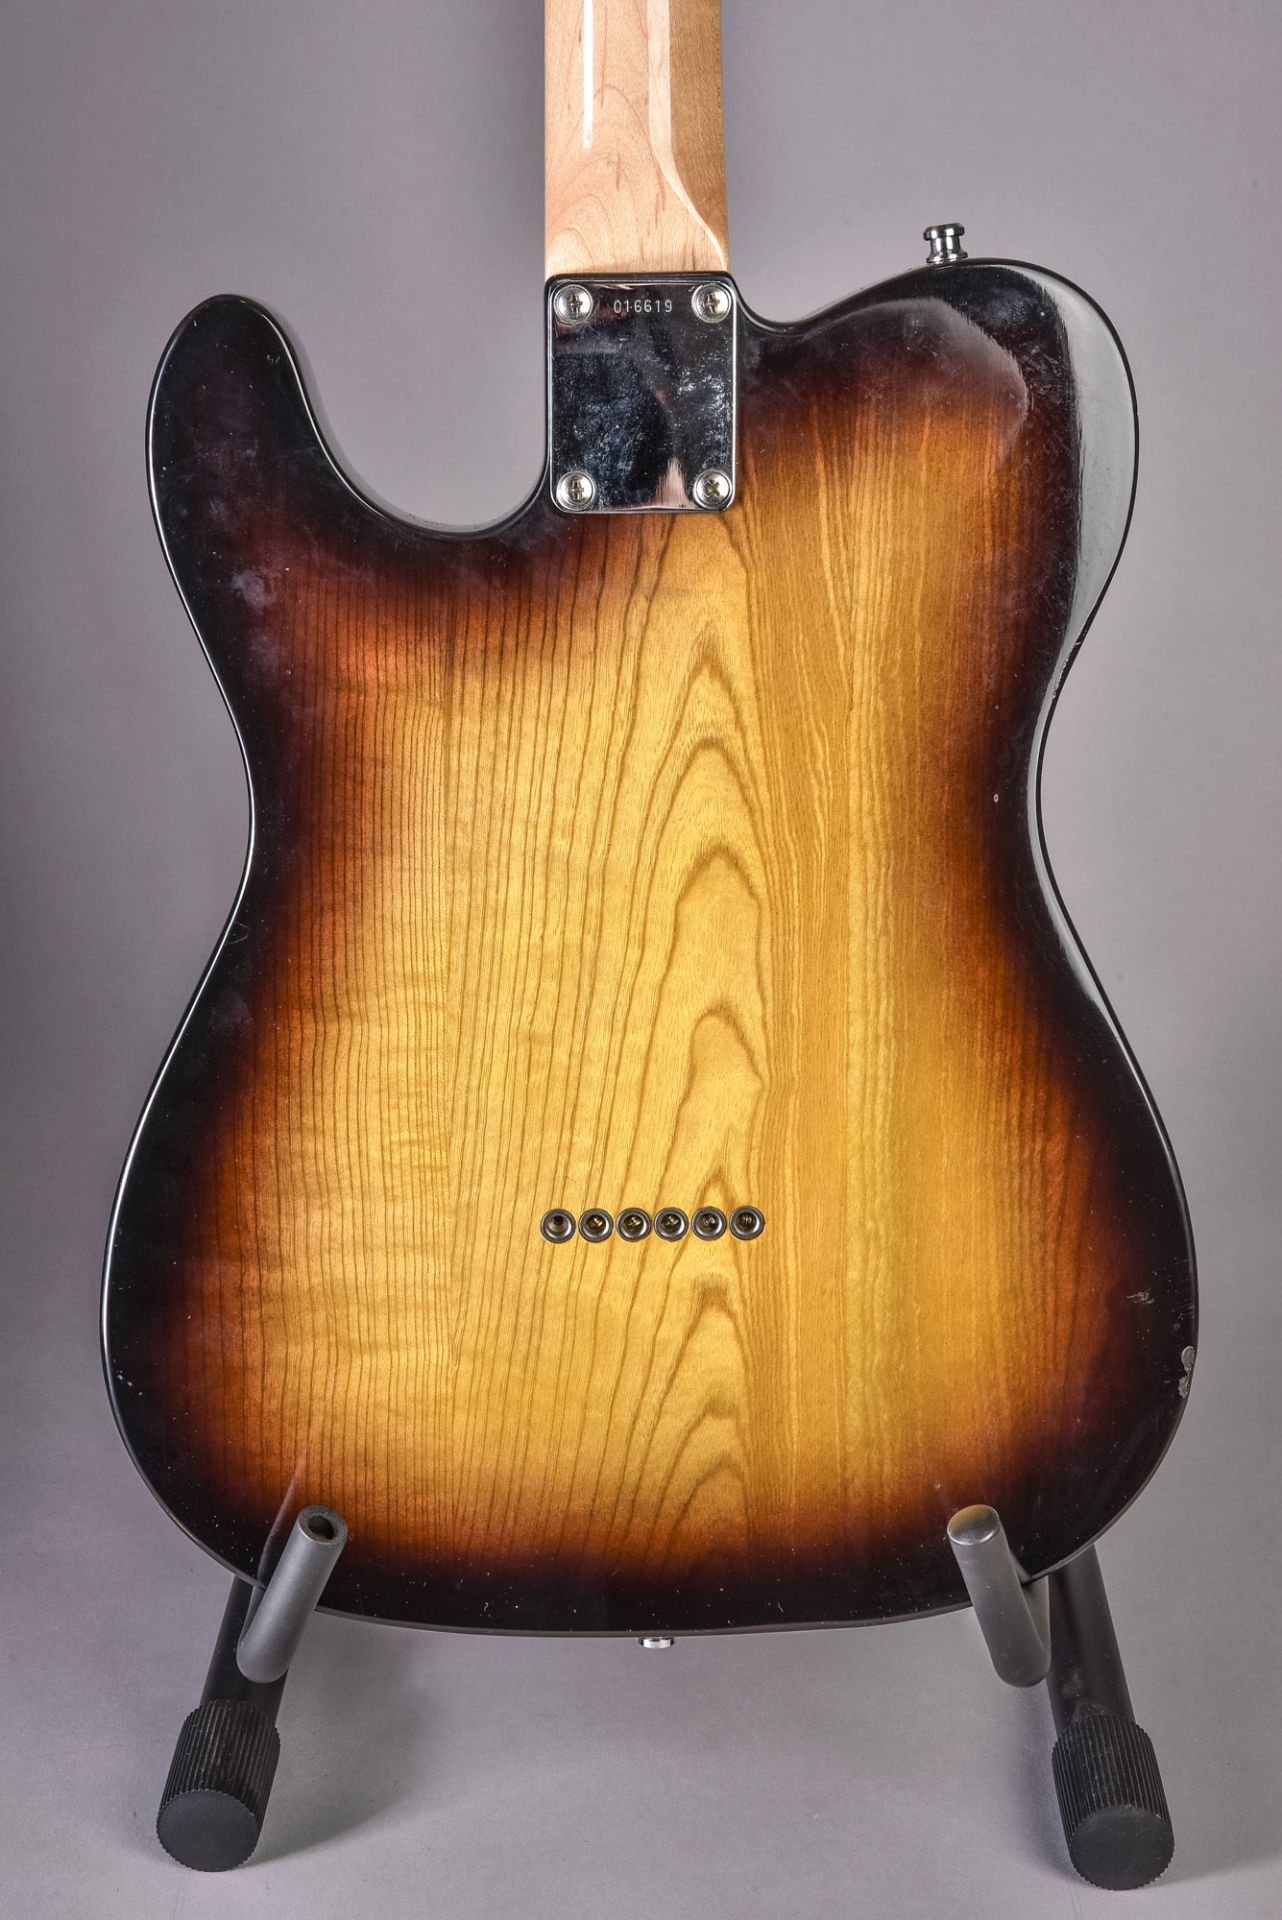 Electric guitar, Tokai "Breezysound" (Tele). Light brown, black rimmed sunburst solid body with whi - Image 12 of 14